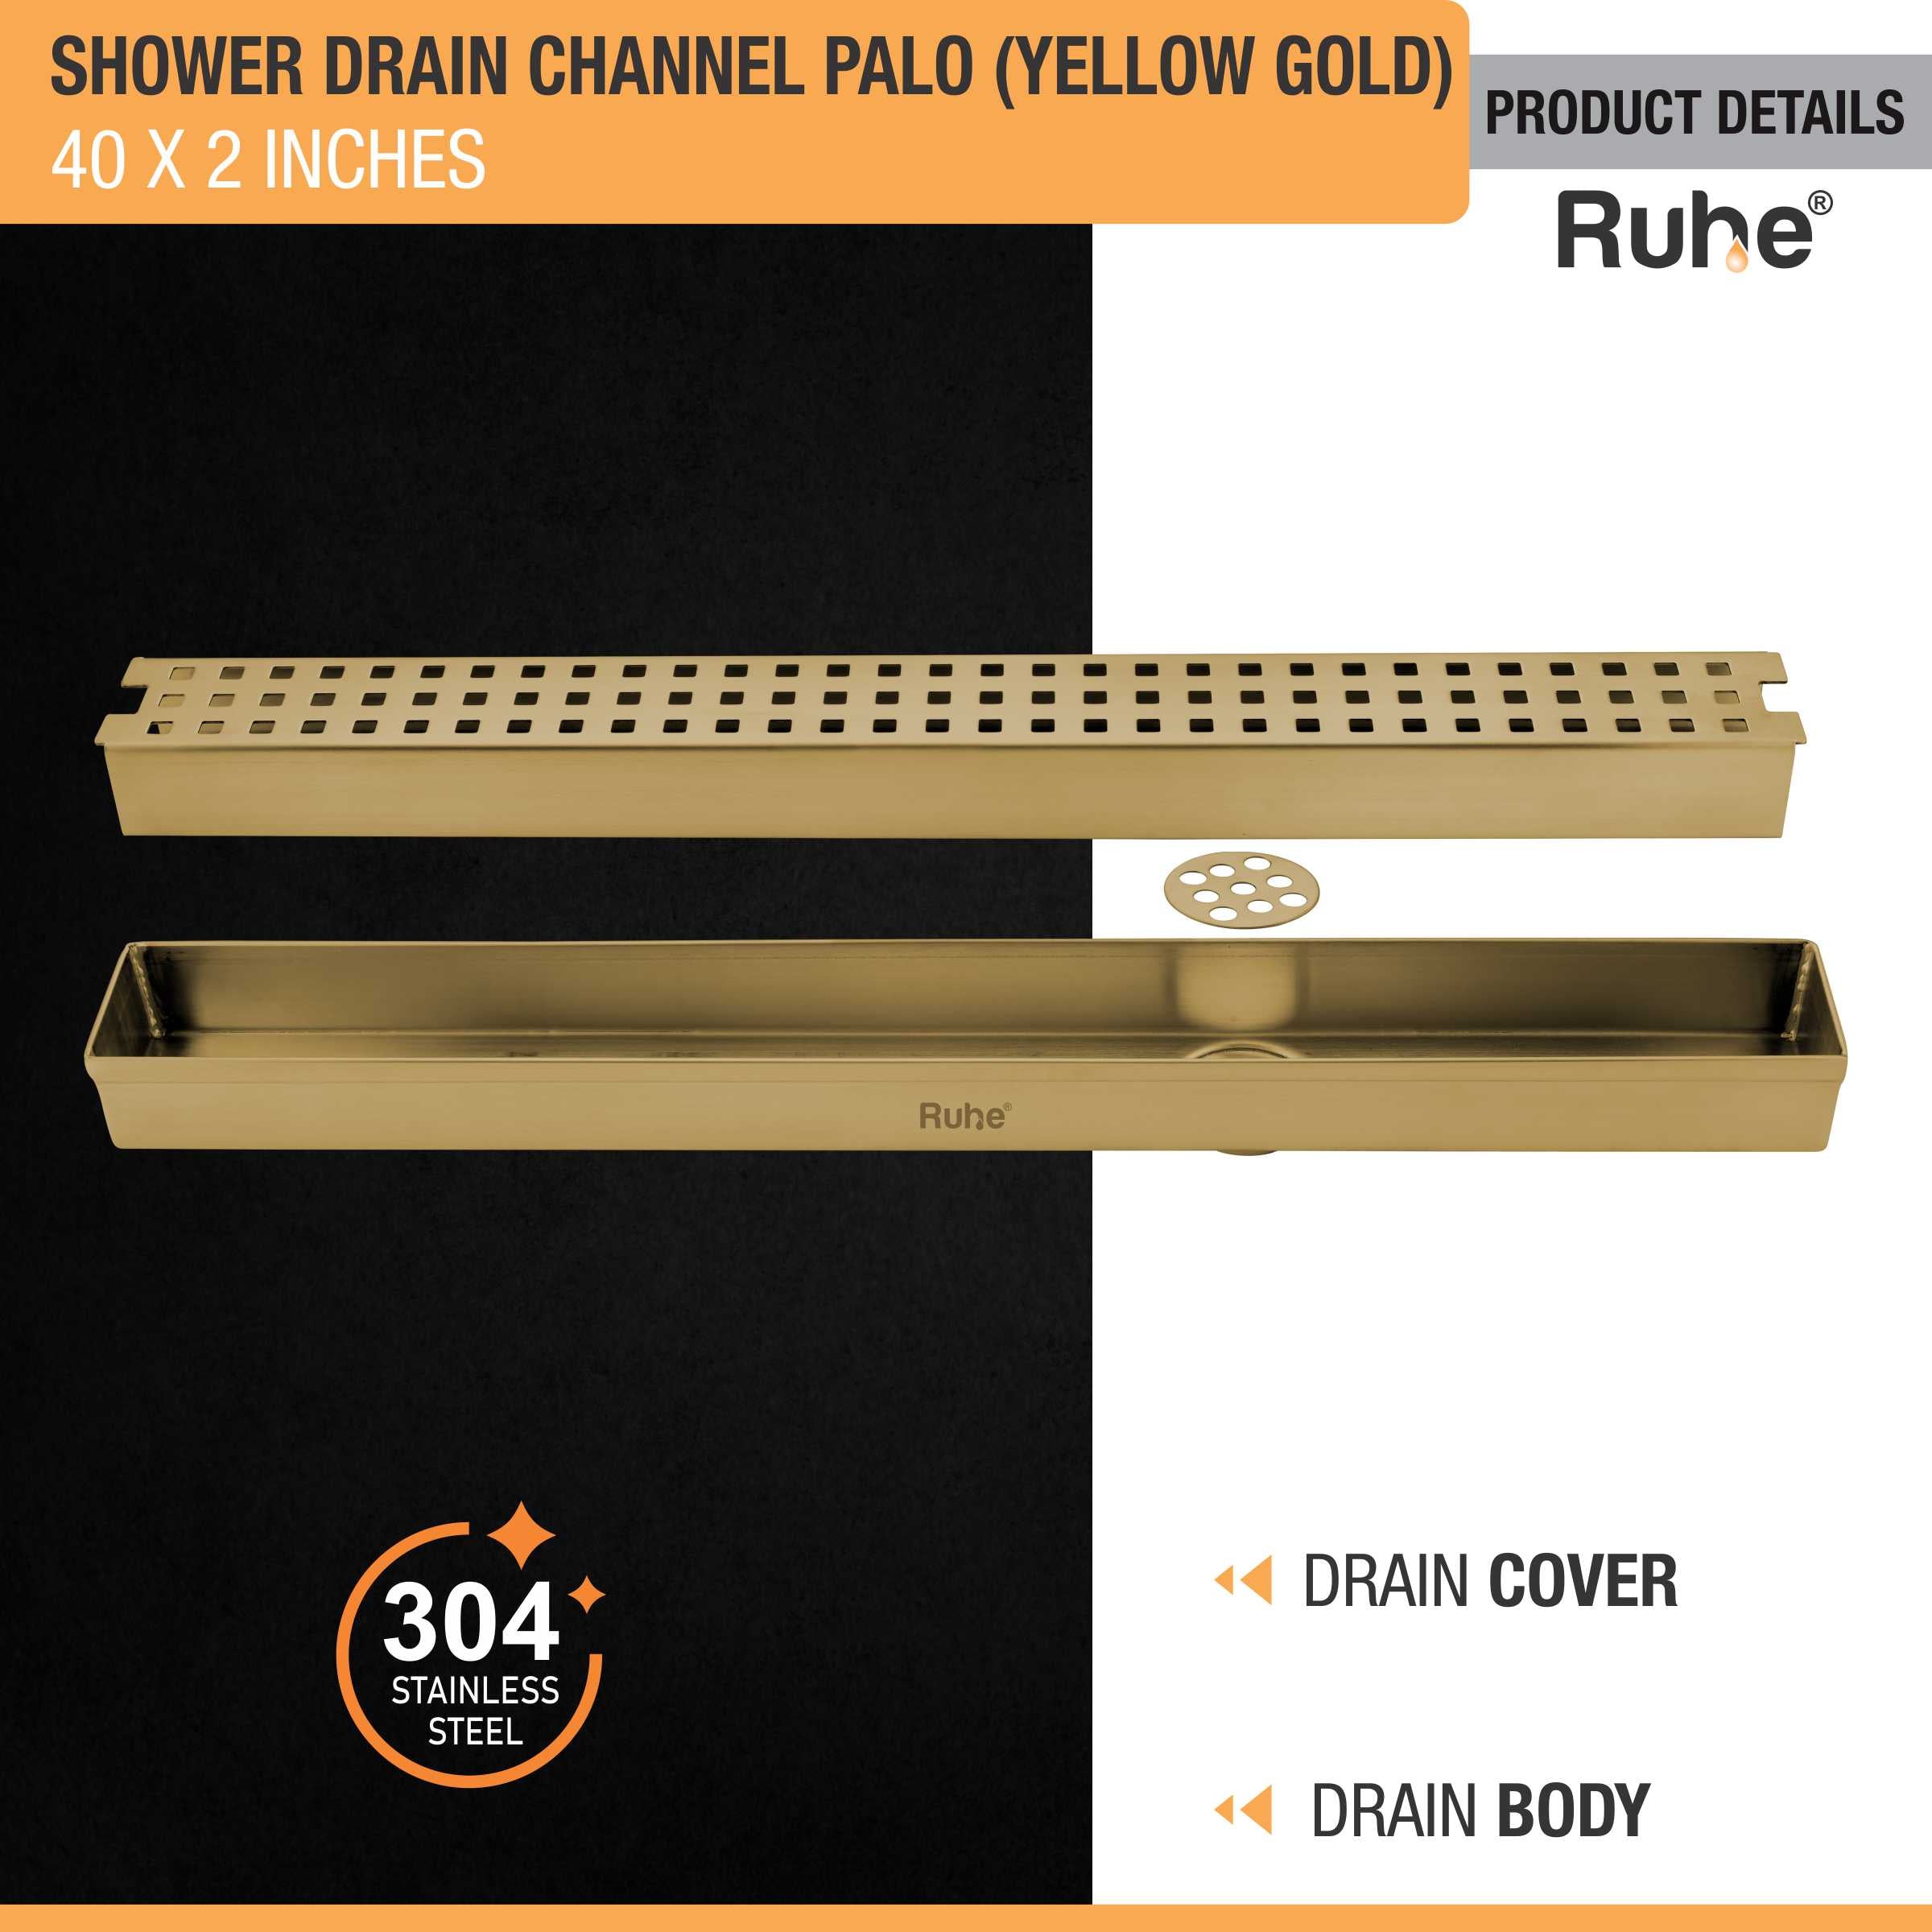 Palo Shower Drain Channel (40 x 2 Inches) YELLOW GOLD product details